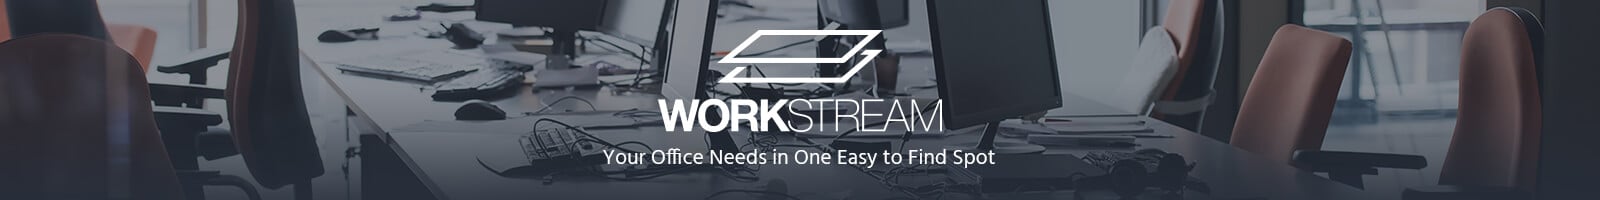 Workstream - Your Office Needs in One Easy to Find Spot